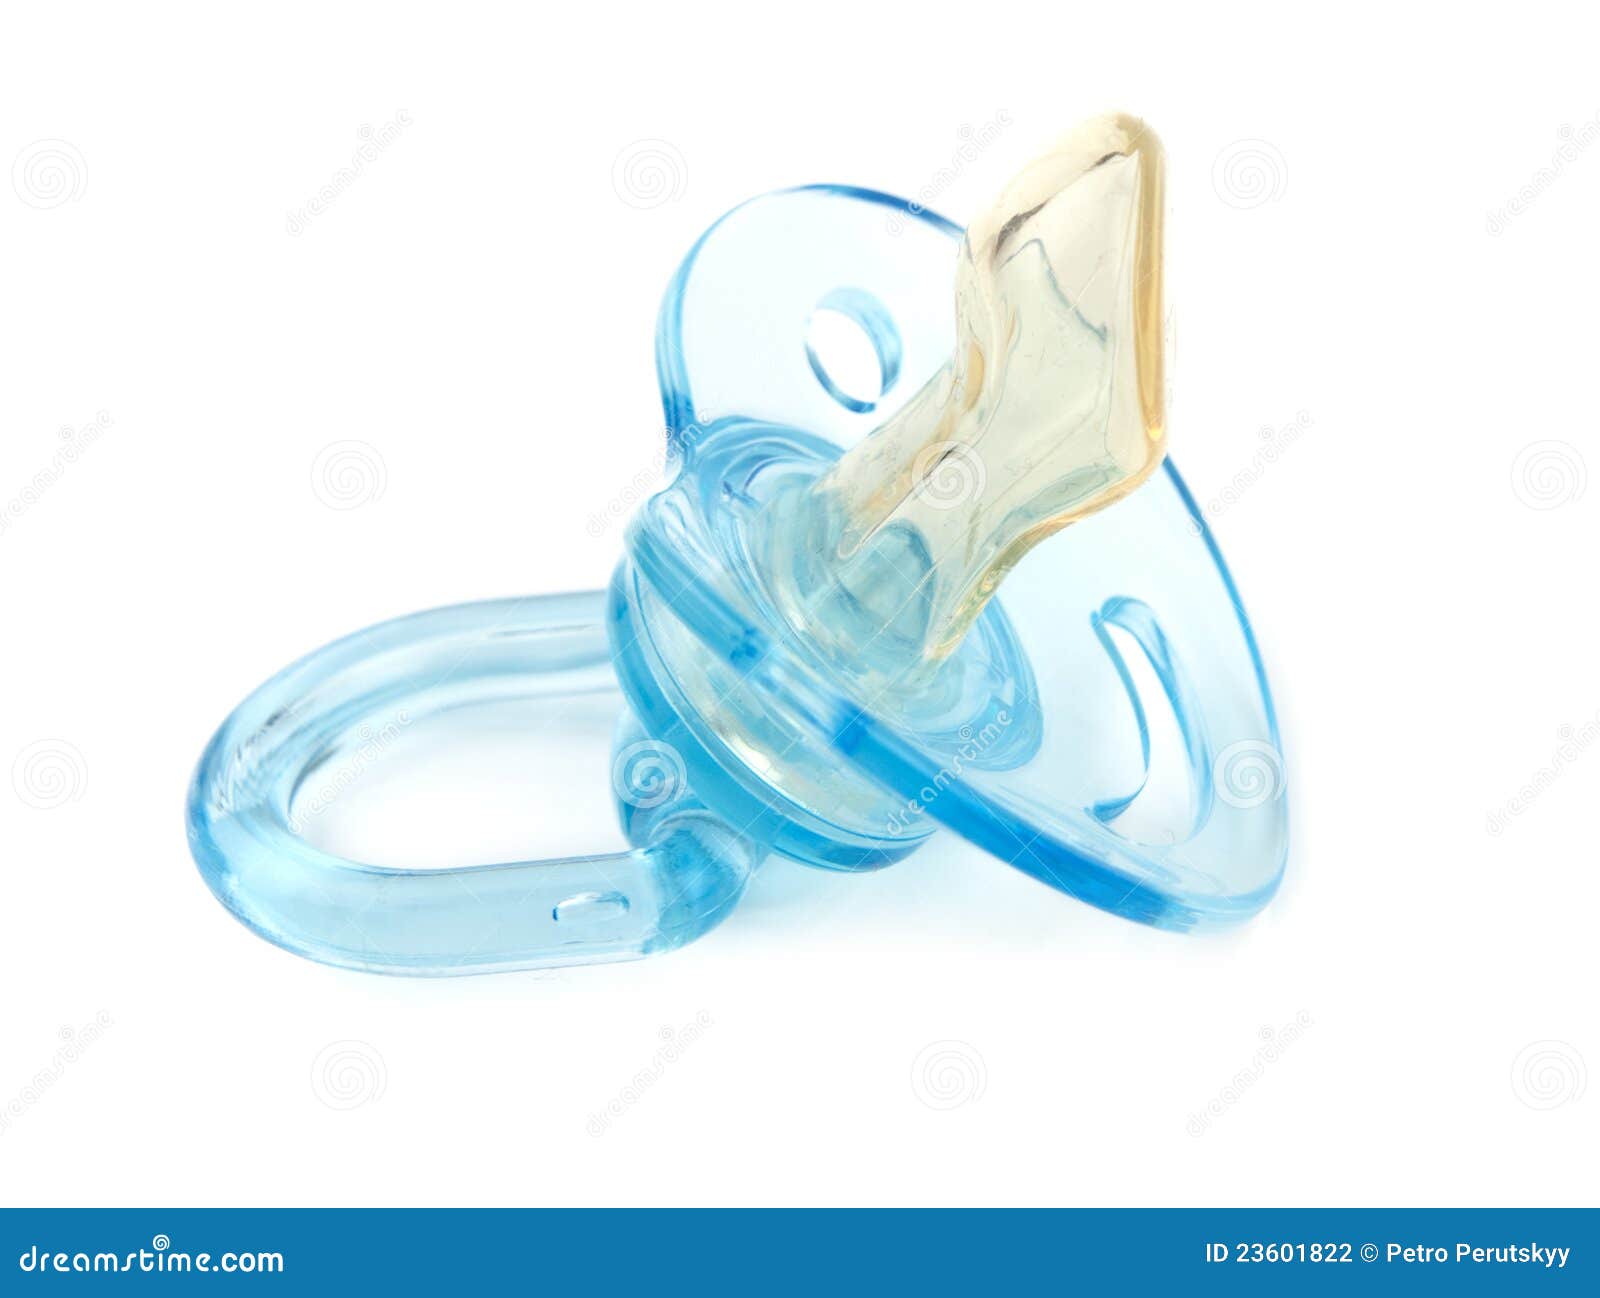 Blue pacifier stock photo. Image of baby, child, plastic - 23601822